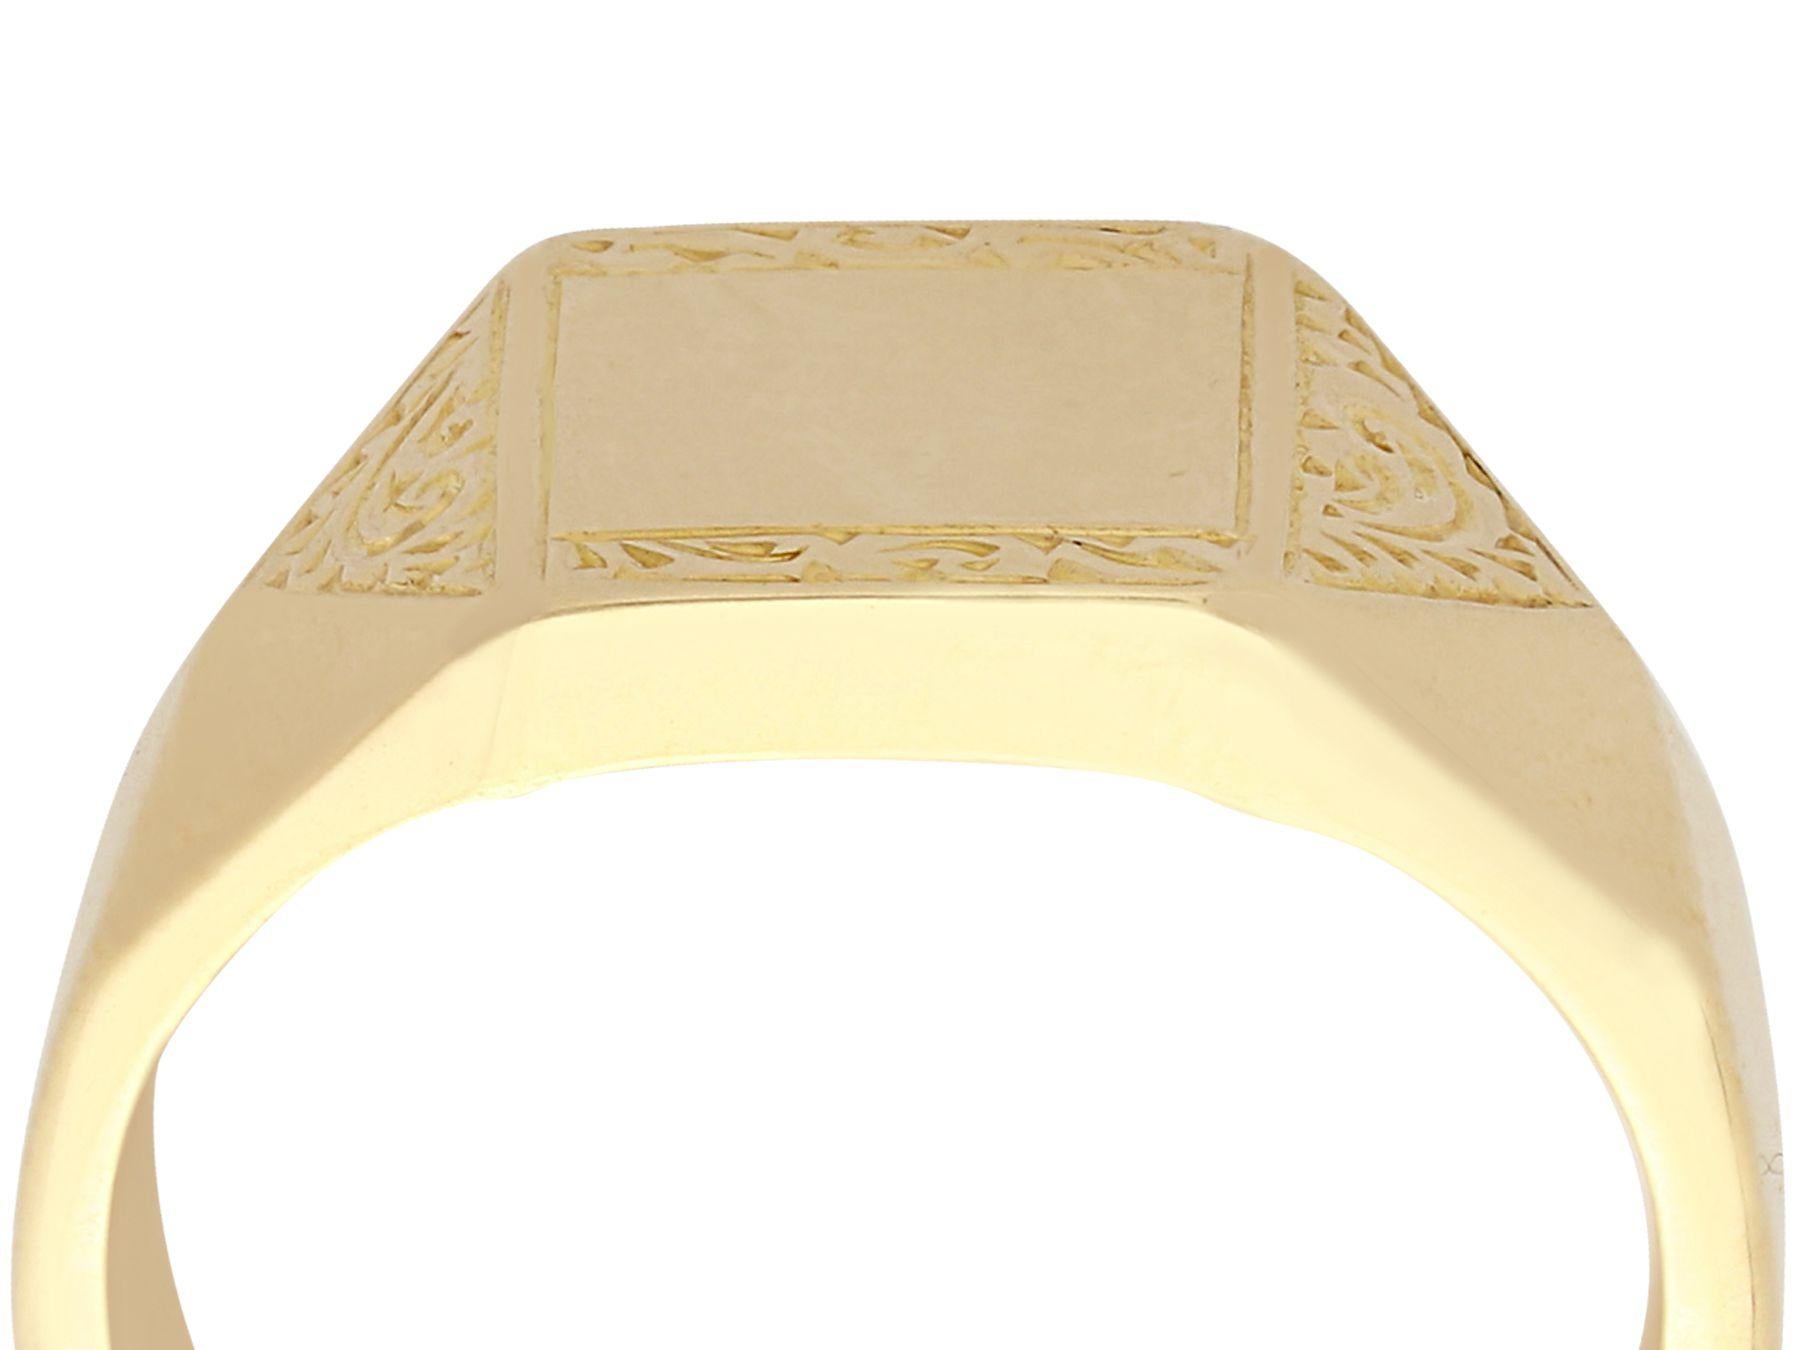 An exceptional, fine and impressive vintage signet ring in 18 karat yellow gold; part of our gent's jewelry and estate jewelry collections.

This fine and impressive vintage signet ring has been crafted in 18k yellow gold.

The ring has a square